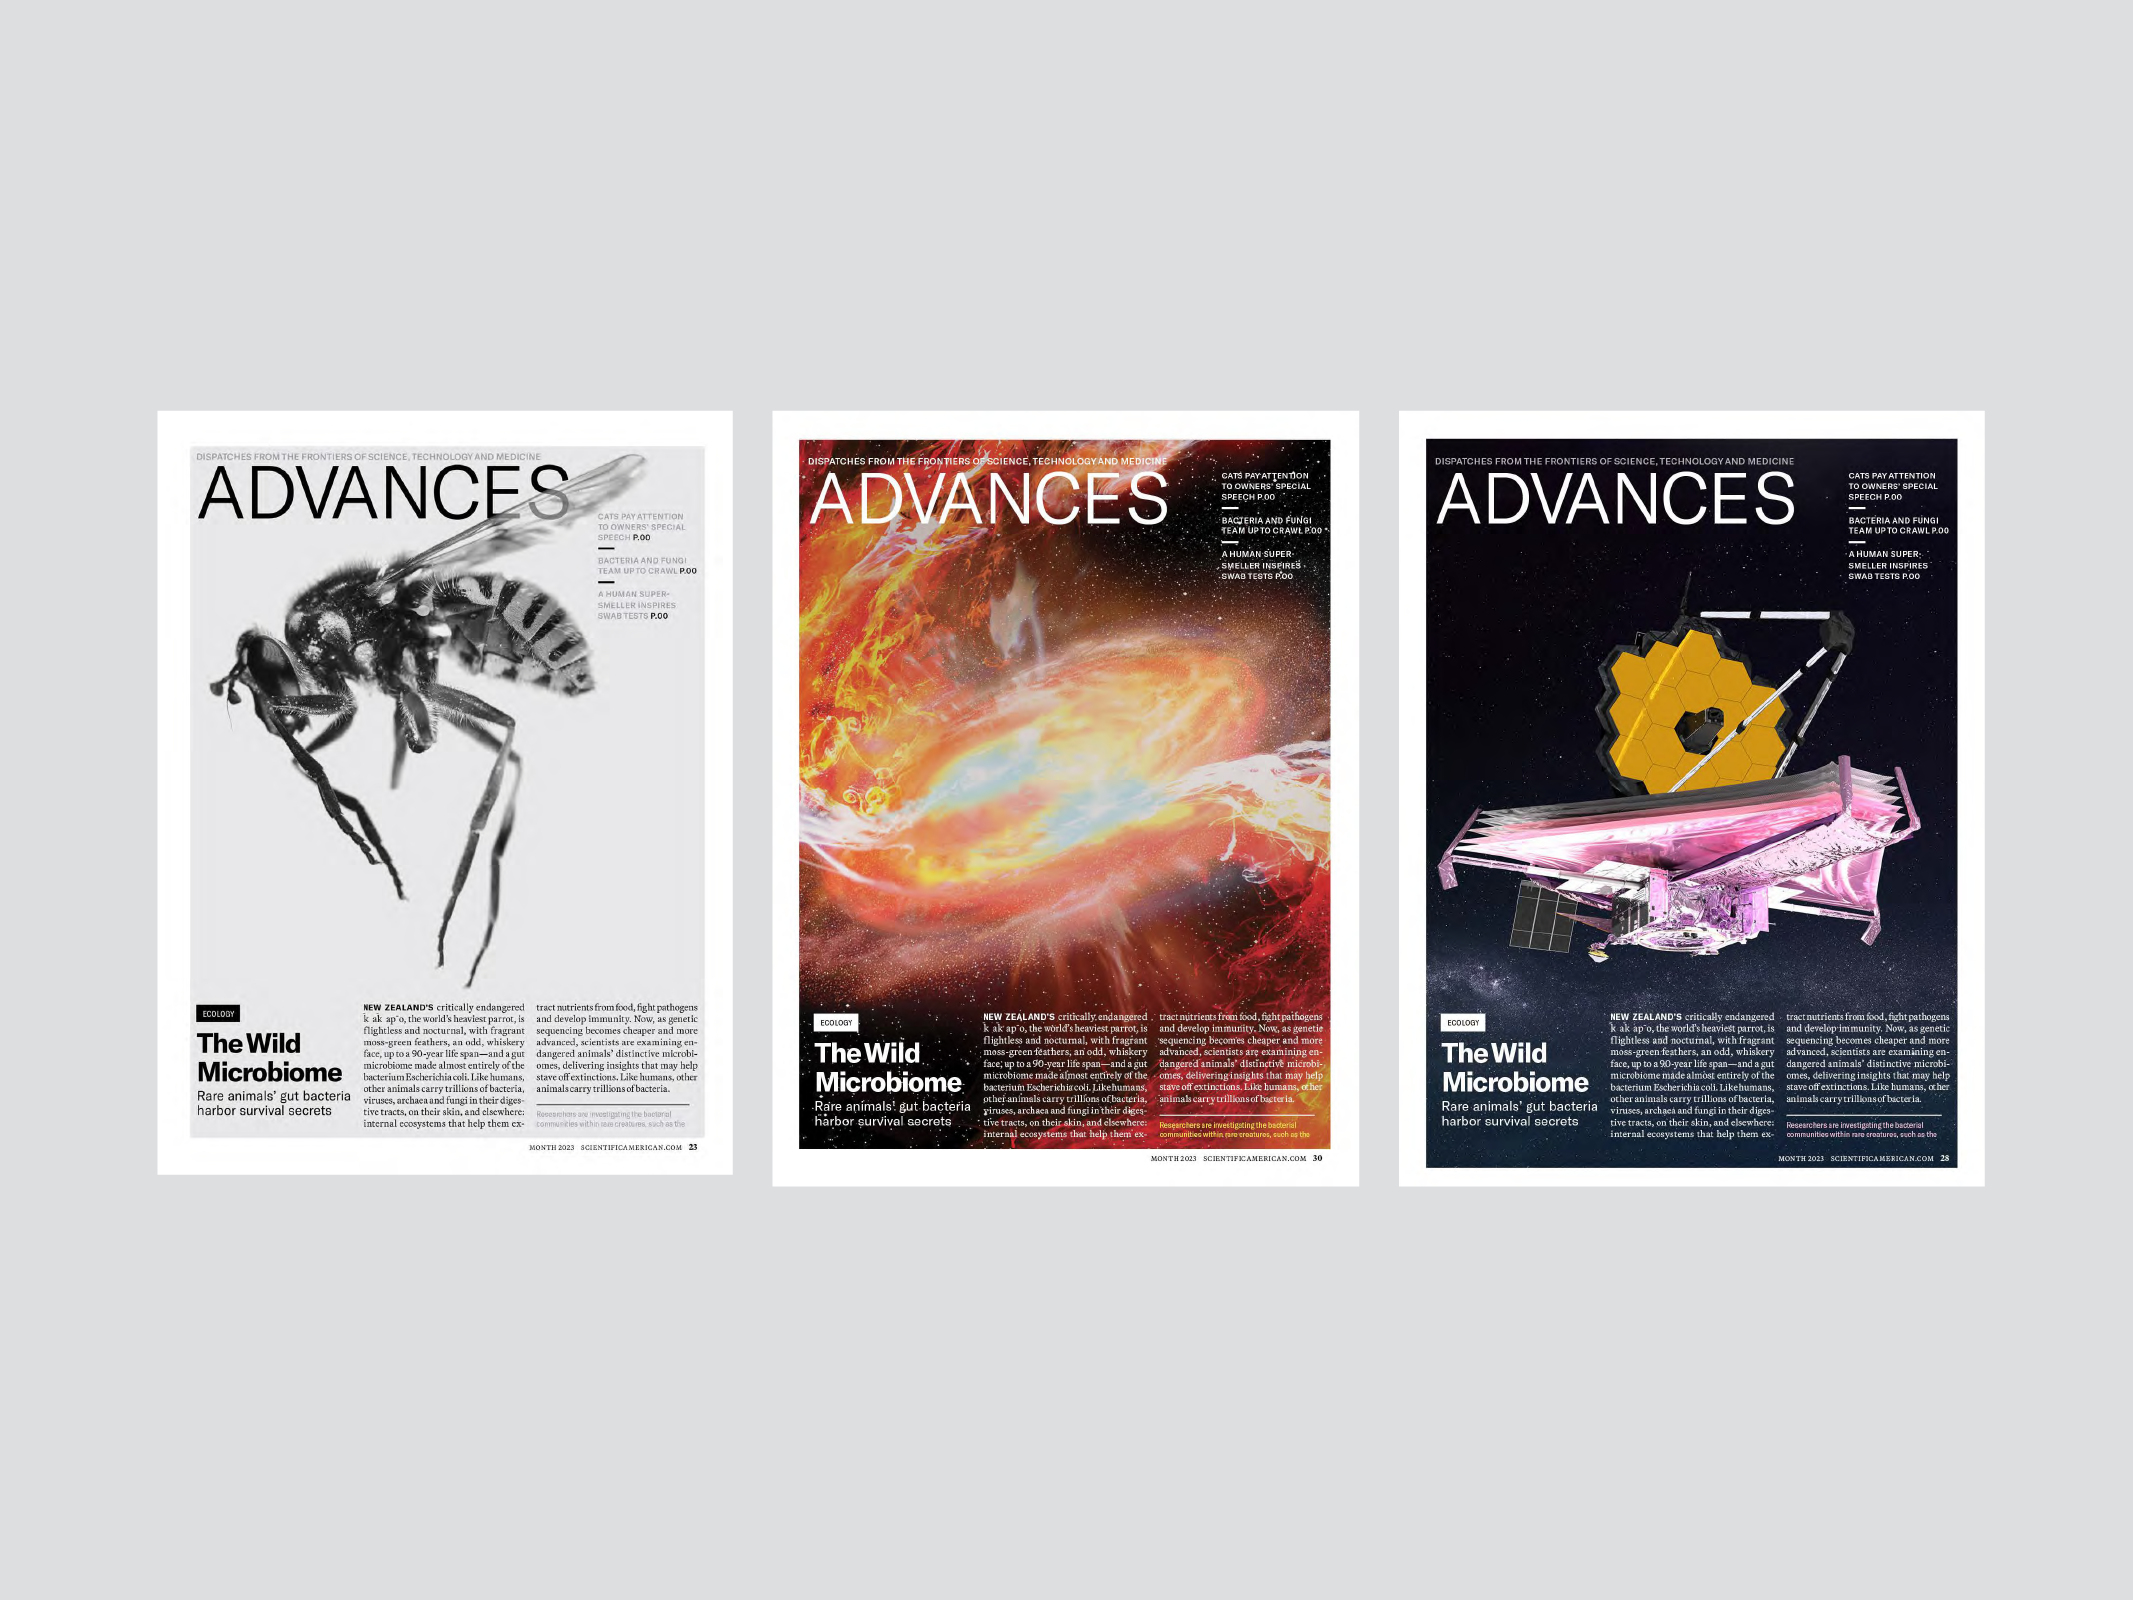 Three Advances article pages.